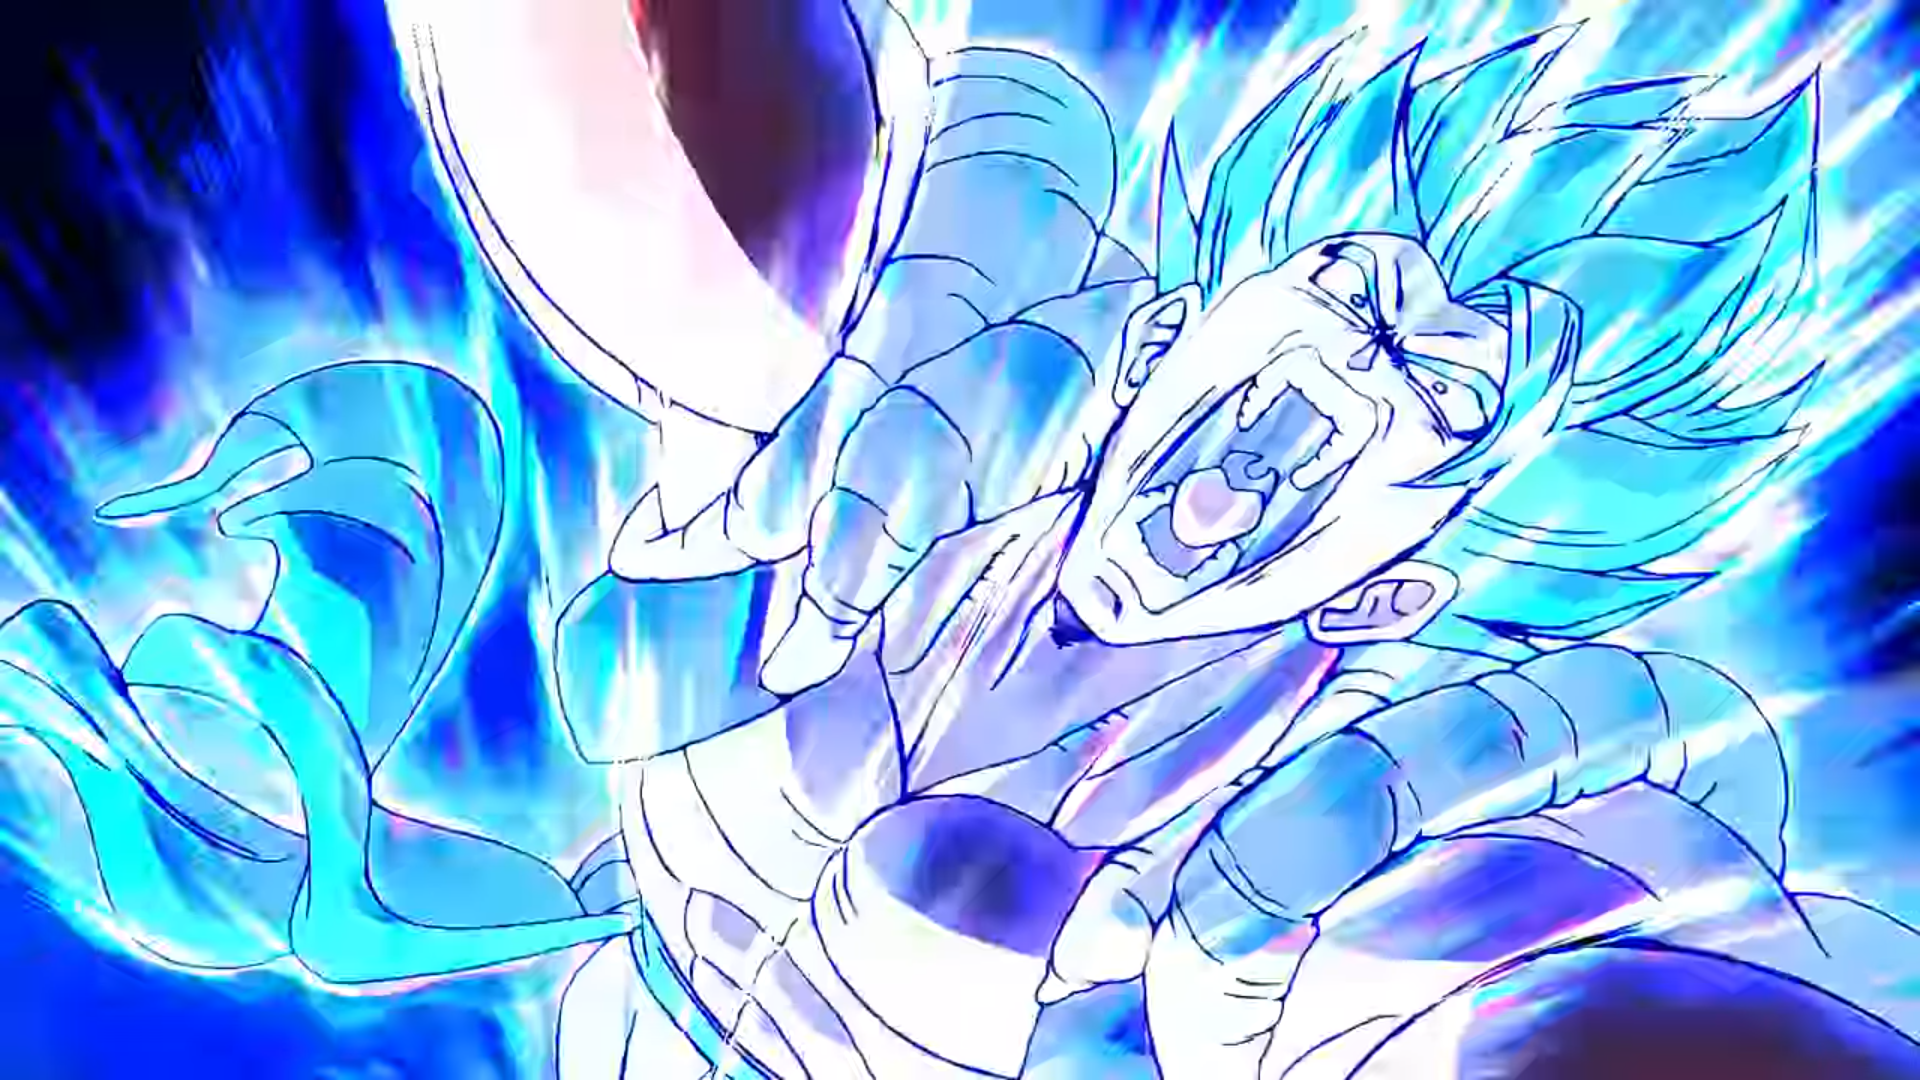 ULTRA GOGETA BLUE IS A GOD! THE GREATEST CREATION IN DRAGON BALL